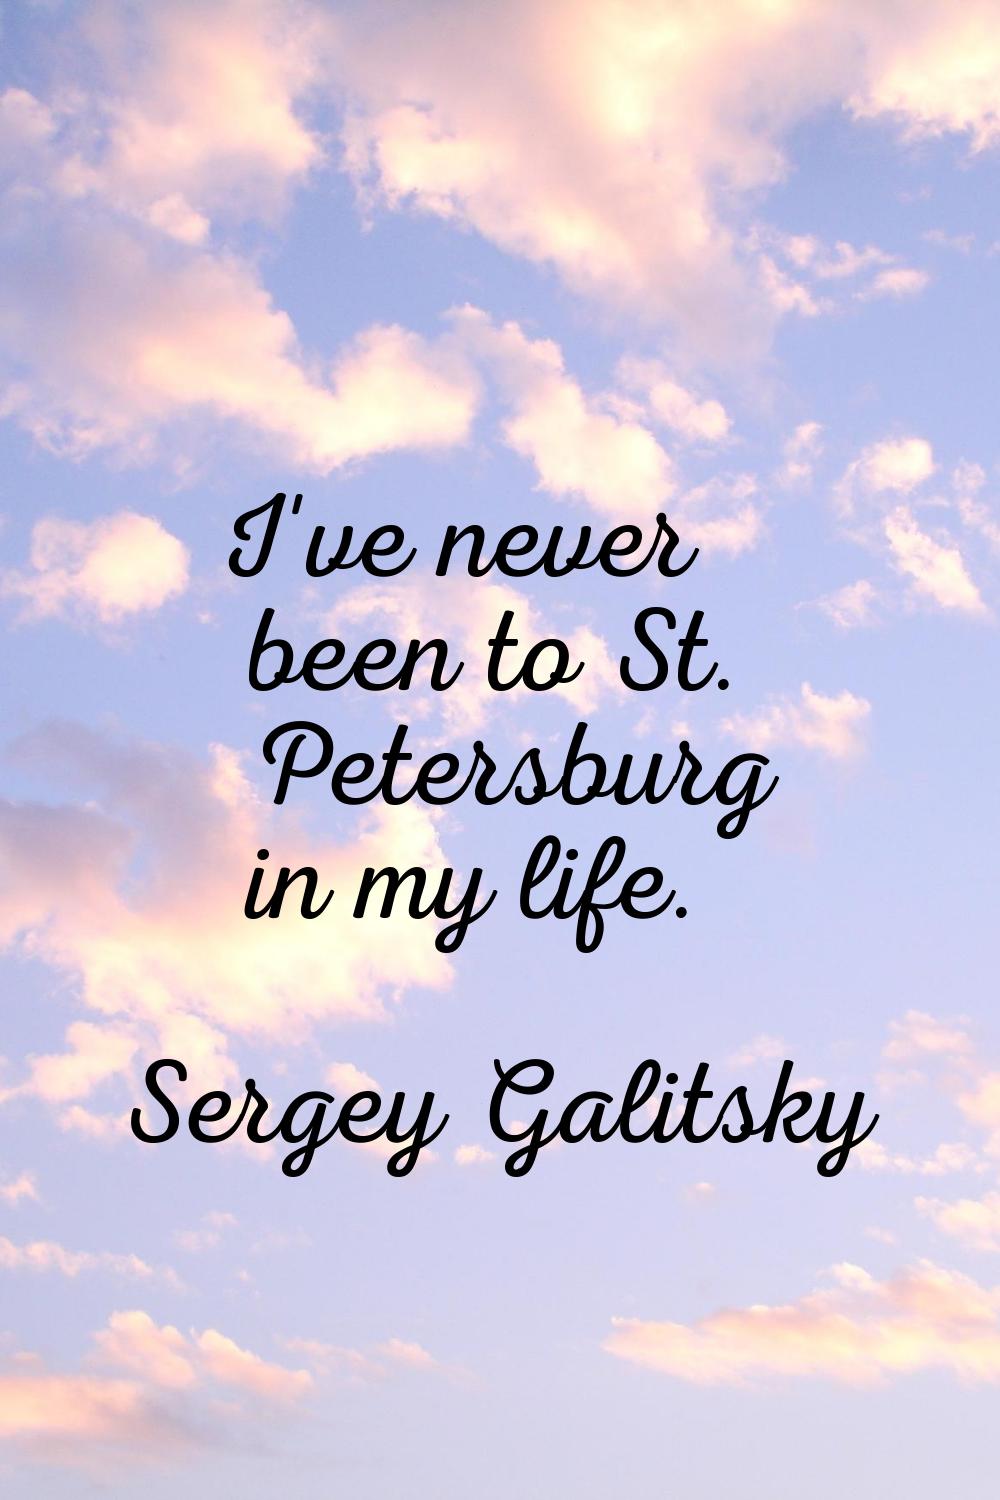 I've never been to St. Petersburg in my life.